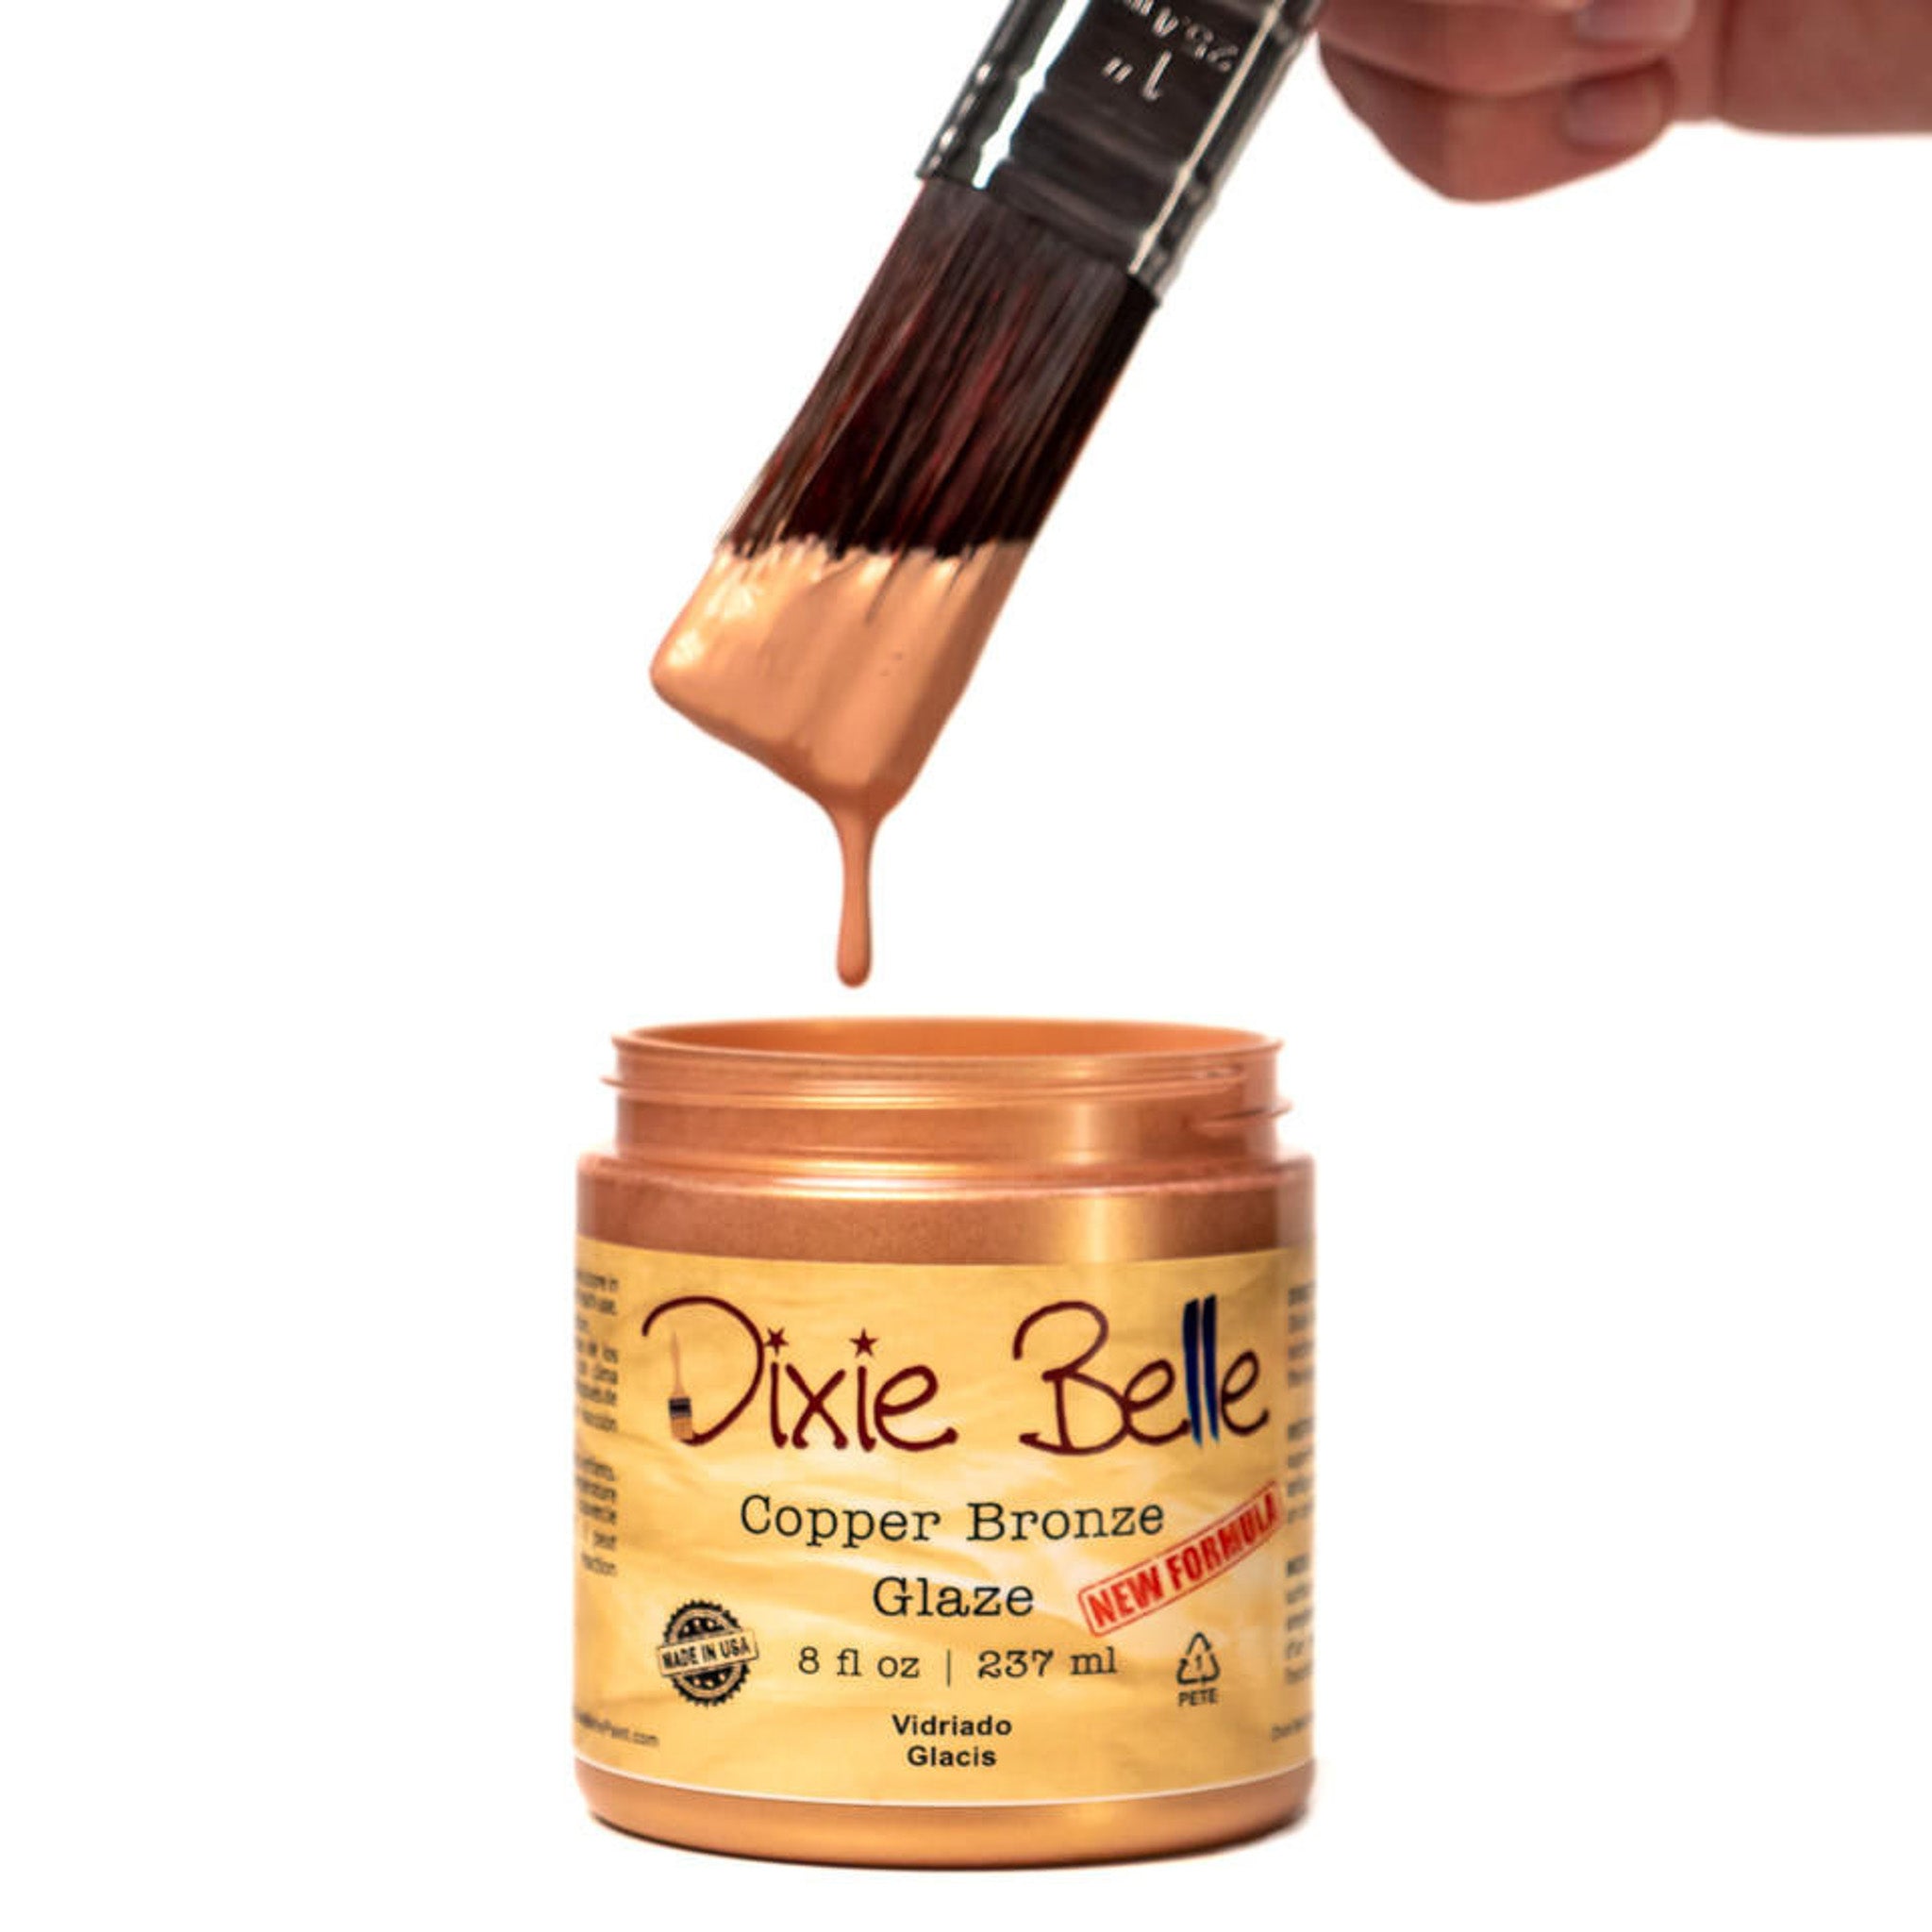 An open container of an 8oz/237ml Dixie Belle Copper Bronze Glaze with a dripping paintbrush above it is against a white background.